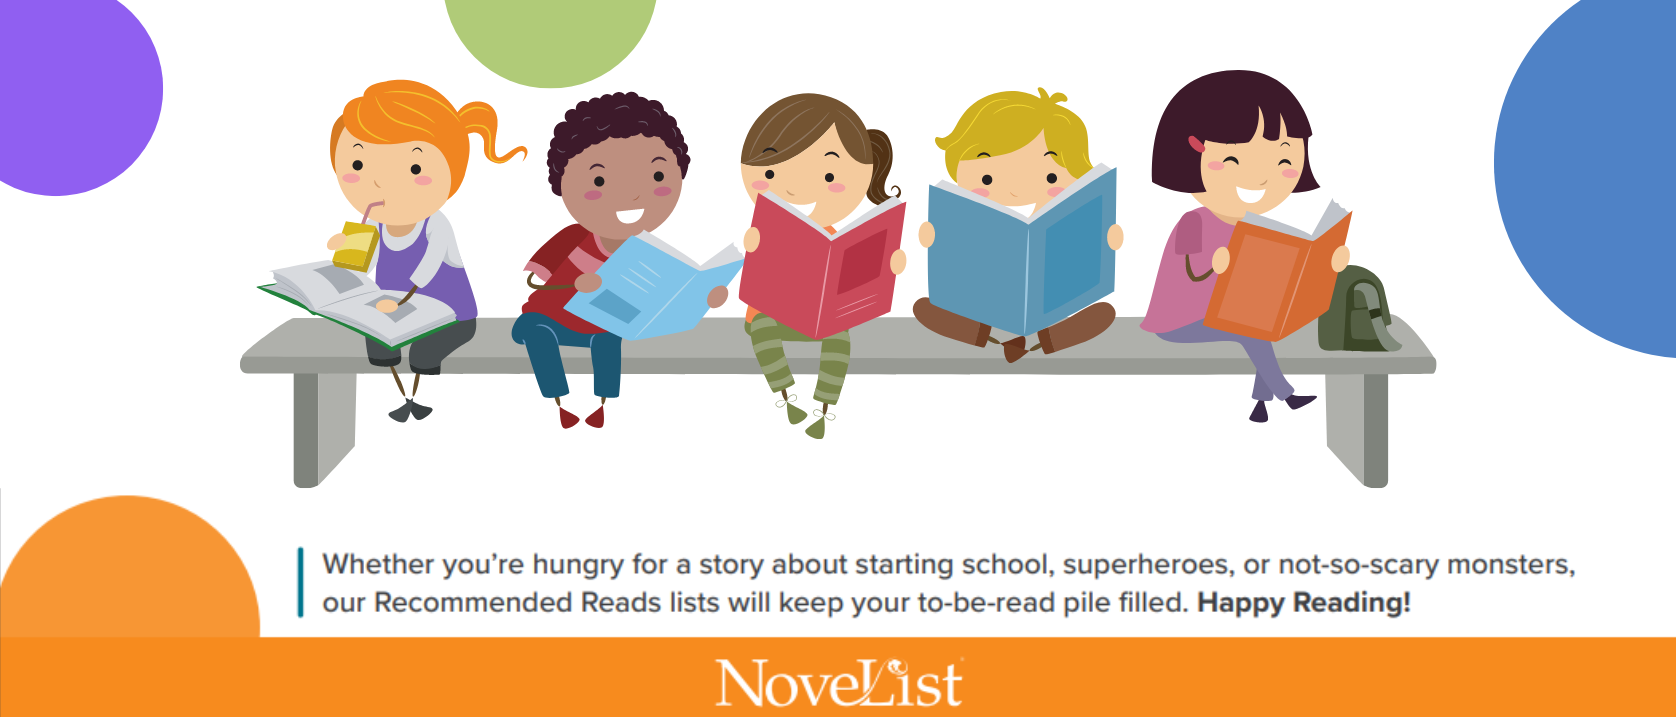 row of kids reading on a bench with the words, Whether you're hungry for a story about starting school, superheroes, or not-so-scary monsters, our Recommended Reads lists will keep your to-be-read pile filled. Happy Reading! NoveList